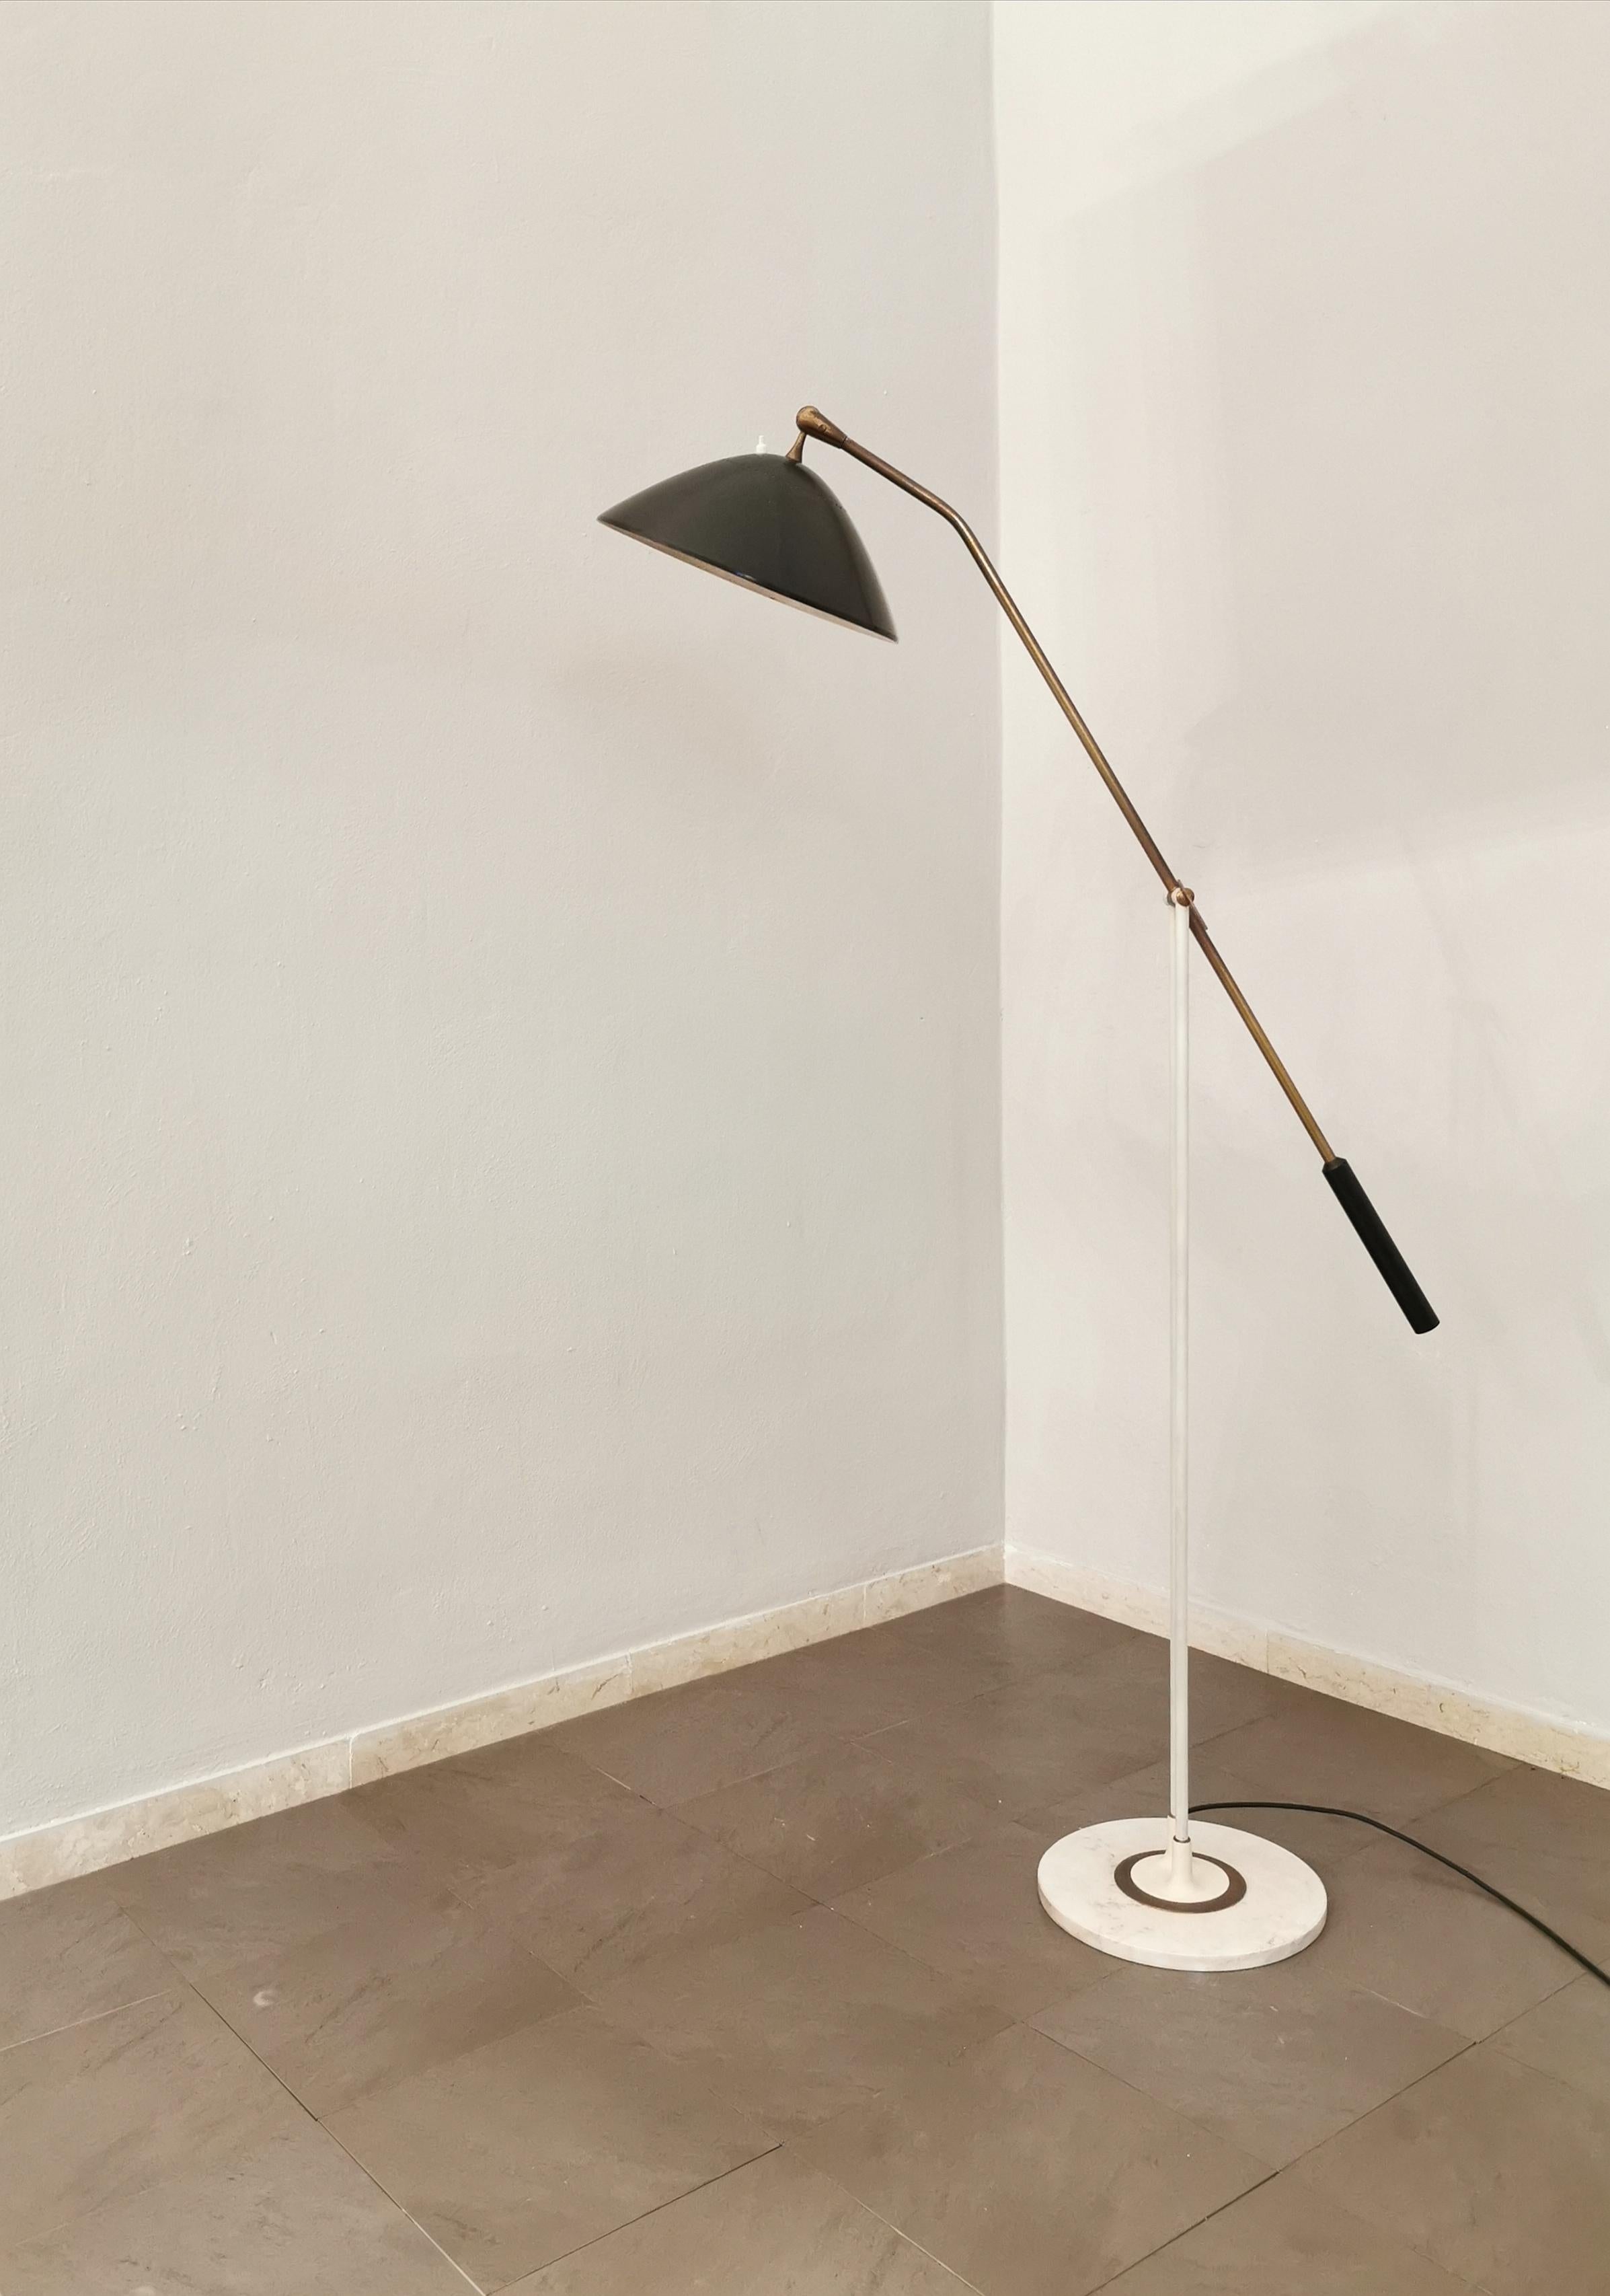 Rare floor lamp produced in the 1950s by the renowned Italian company Stilnovo. The lamp has a circular marble base, where 2 white enamelled metal rods rise which join the long moving arm in brass with black enamelled aluminum diffuser.